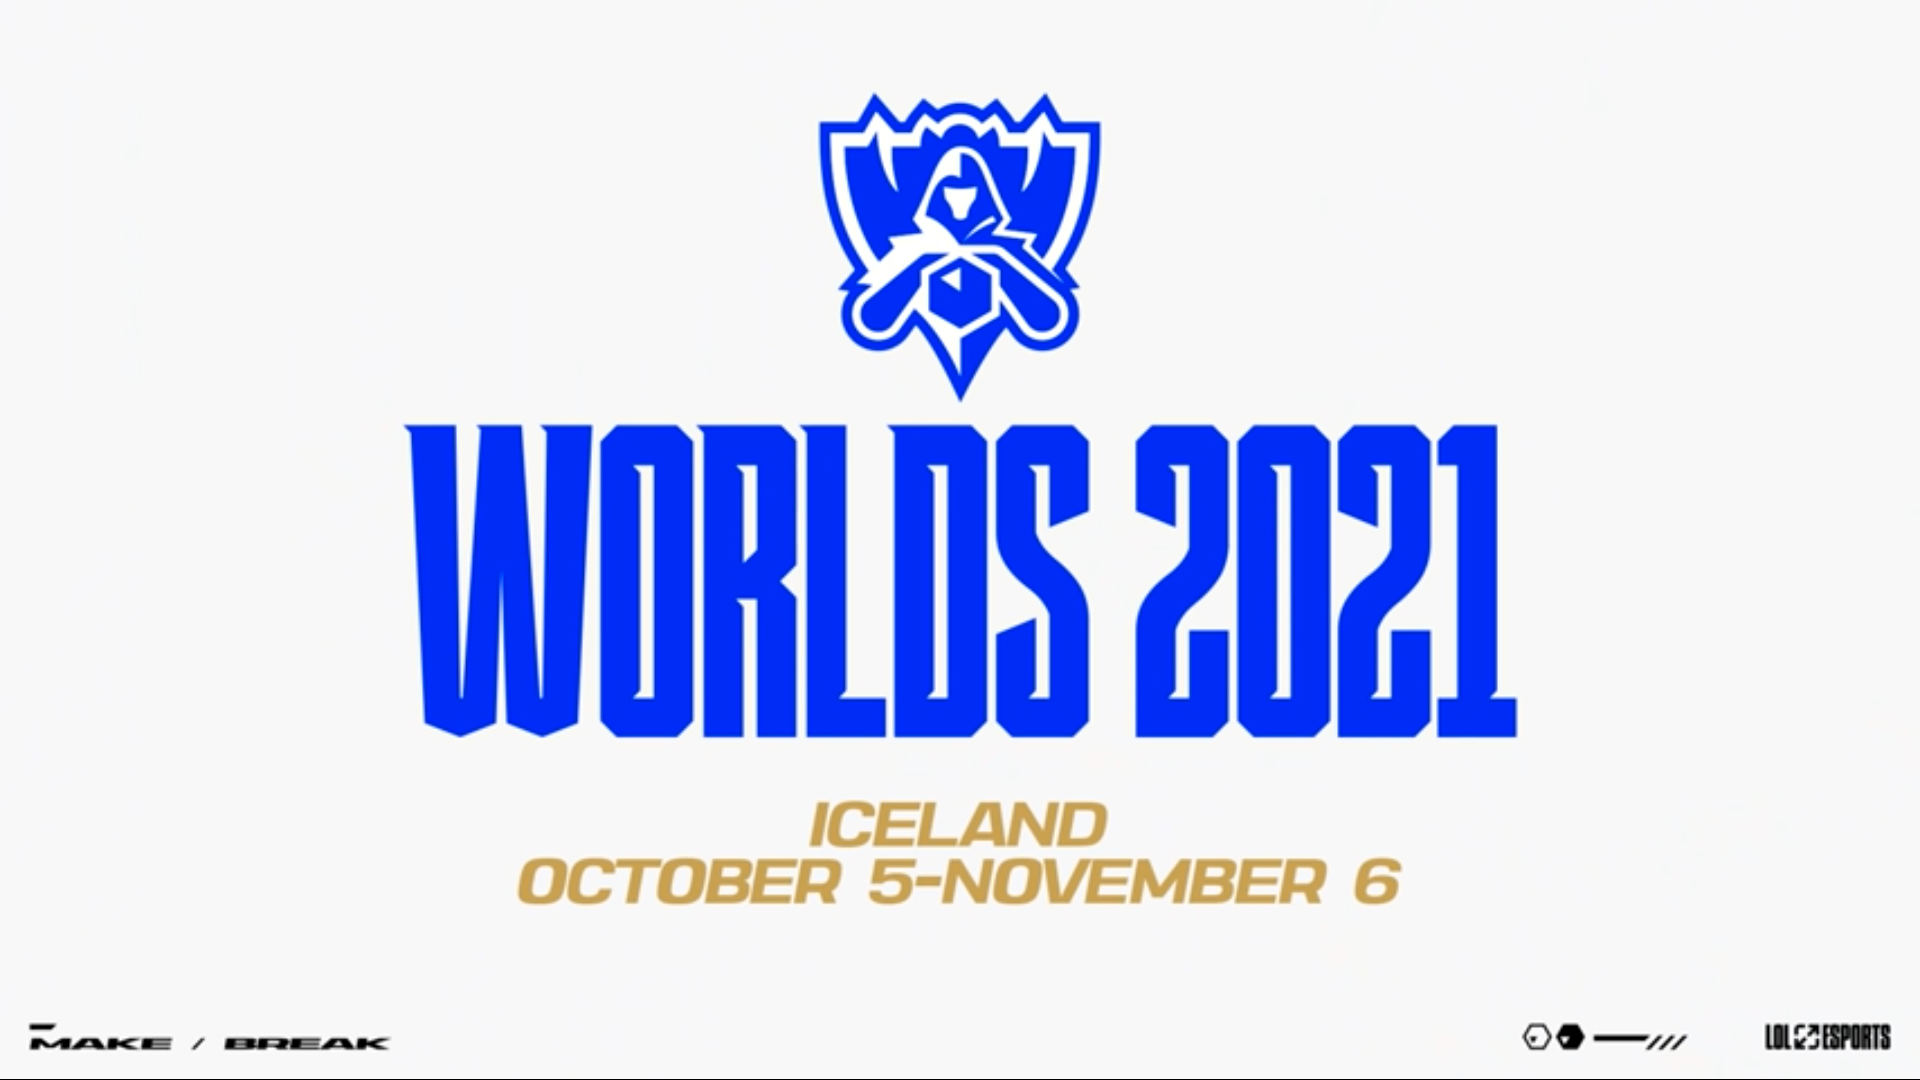 Riot Games confirms League of Legends Worlds 2021 in Iceland, begins October 5th - Esports Insider